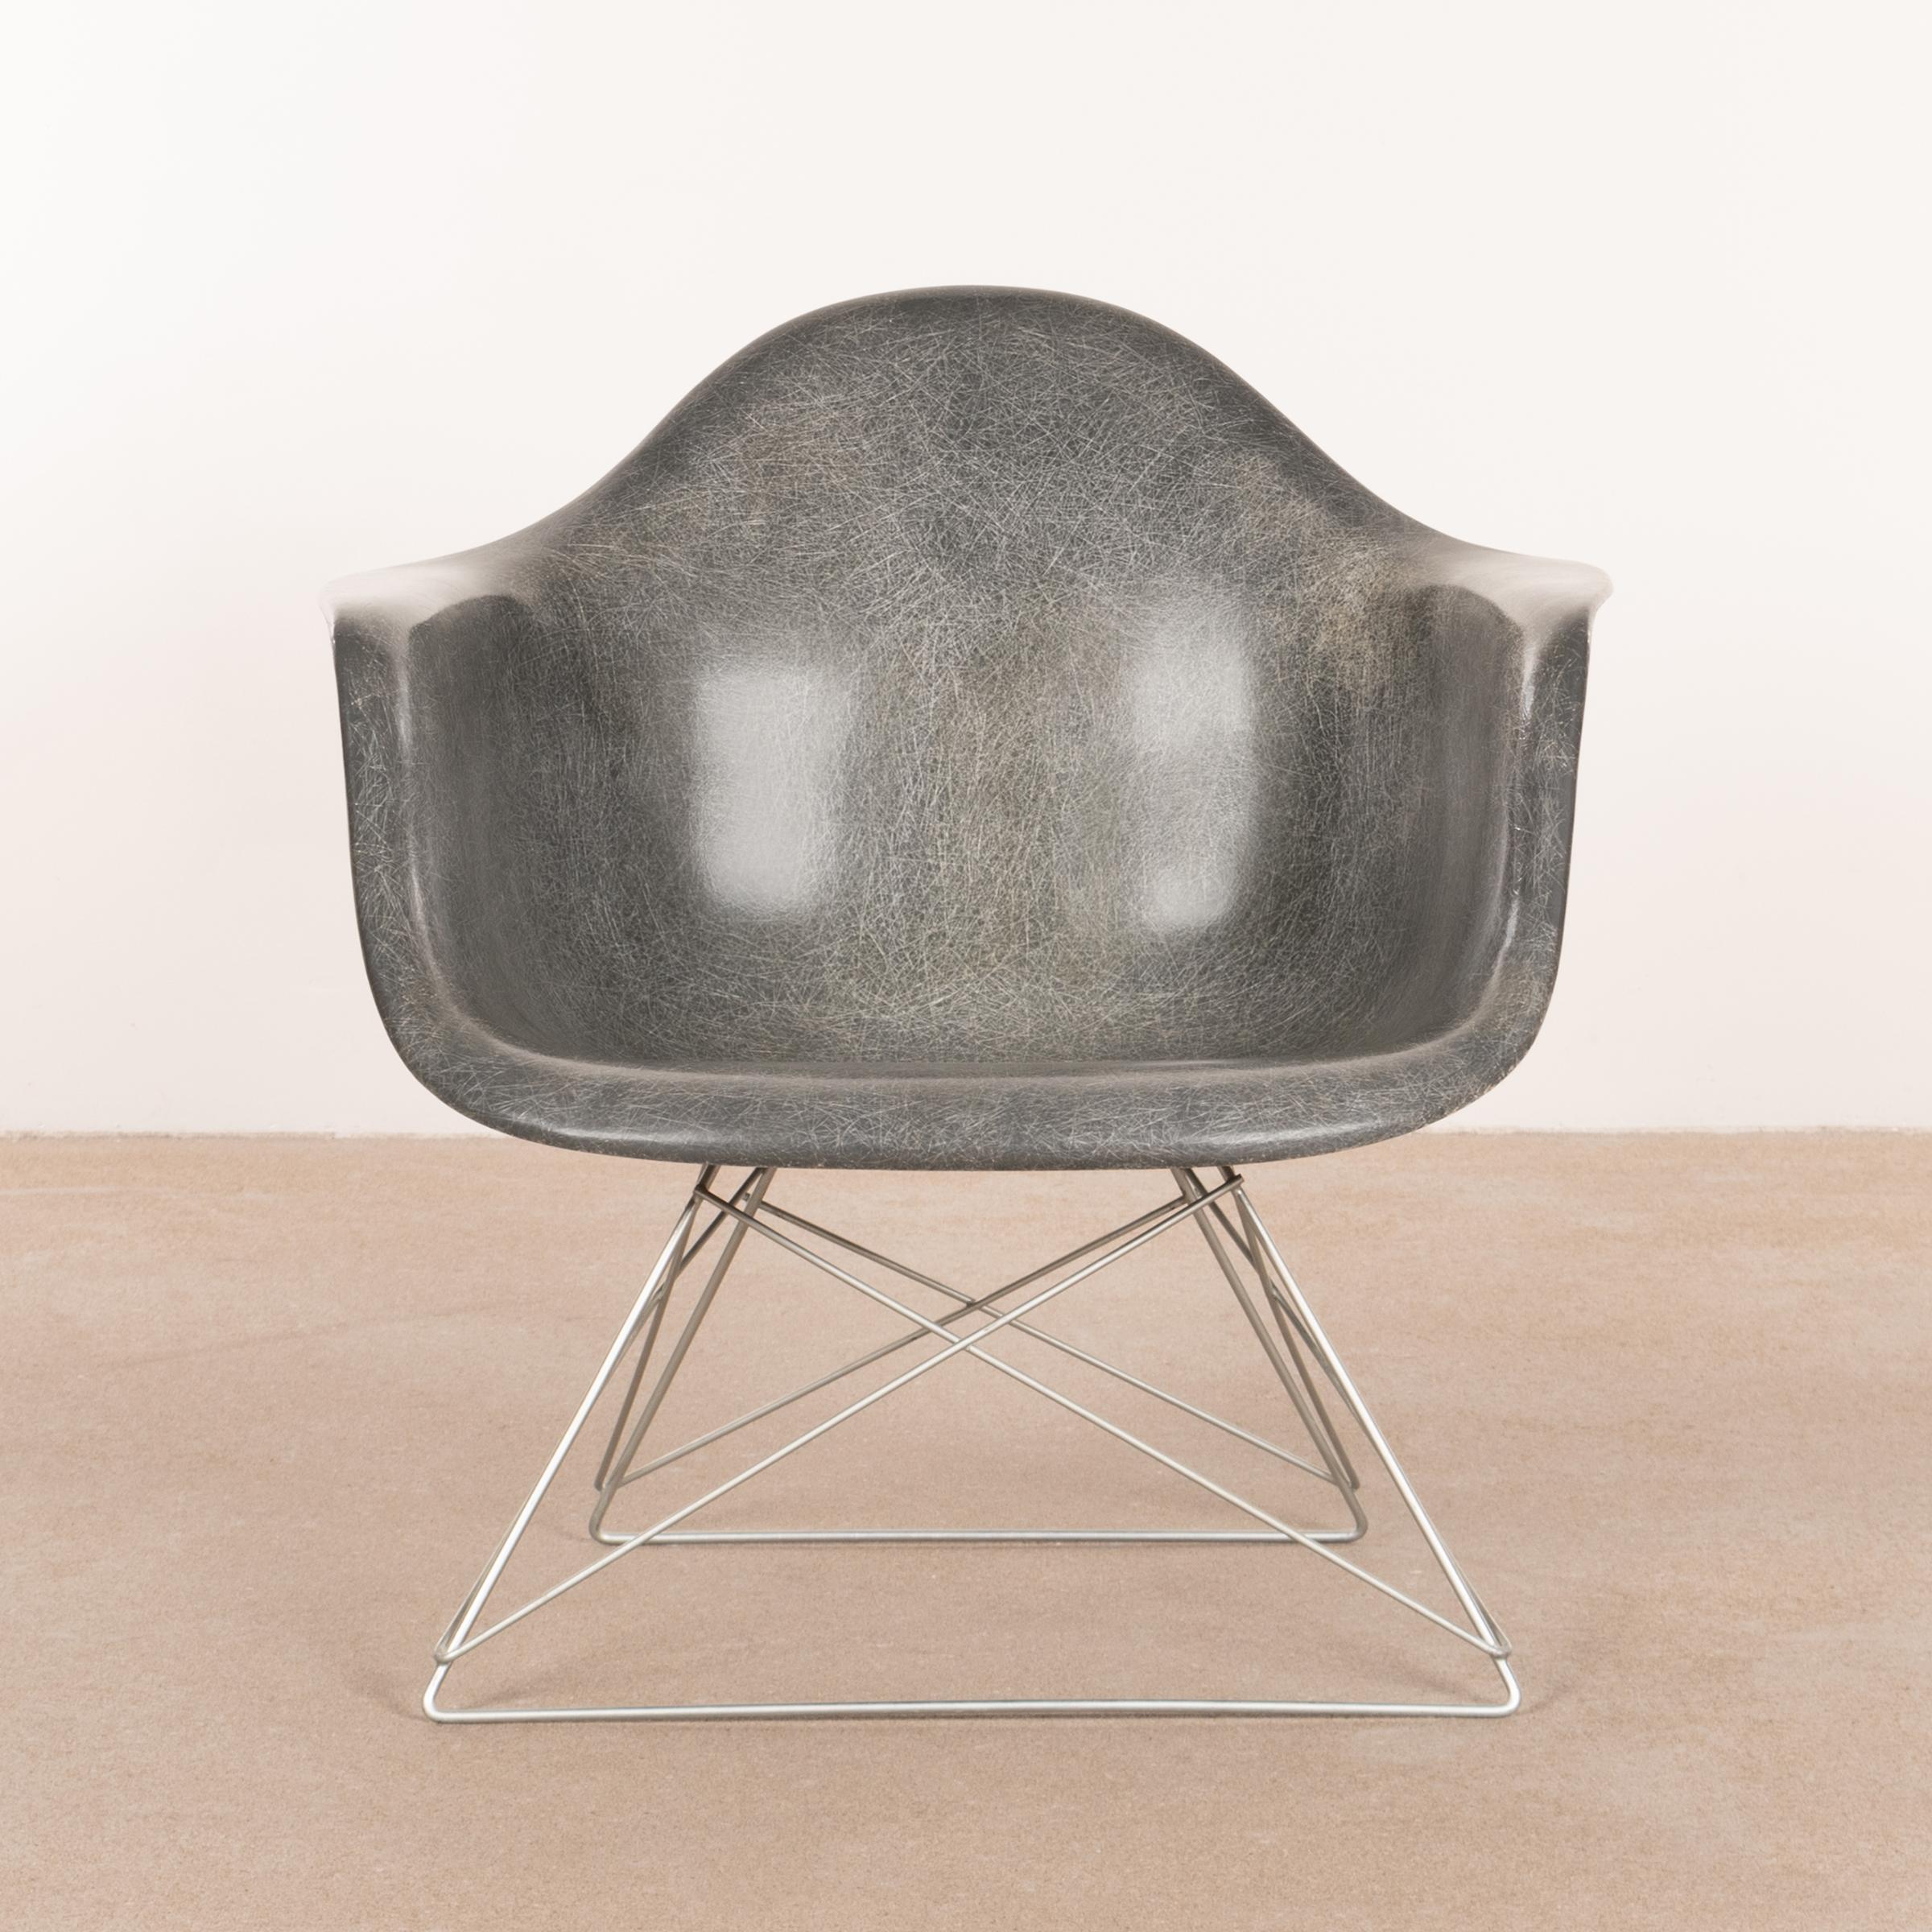 Beautiful and iconic late 1950s LAR (low-rod) lounge armchair in very good condition by Charles and Ray Eames. Original base and signed with embossed factory logo (Summit / double triangle).